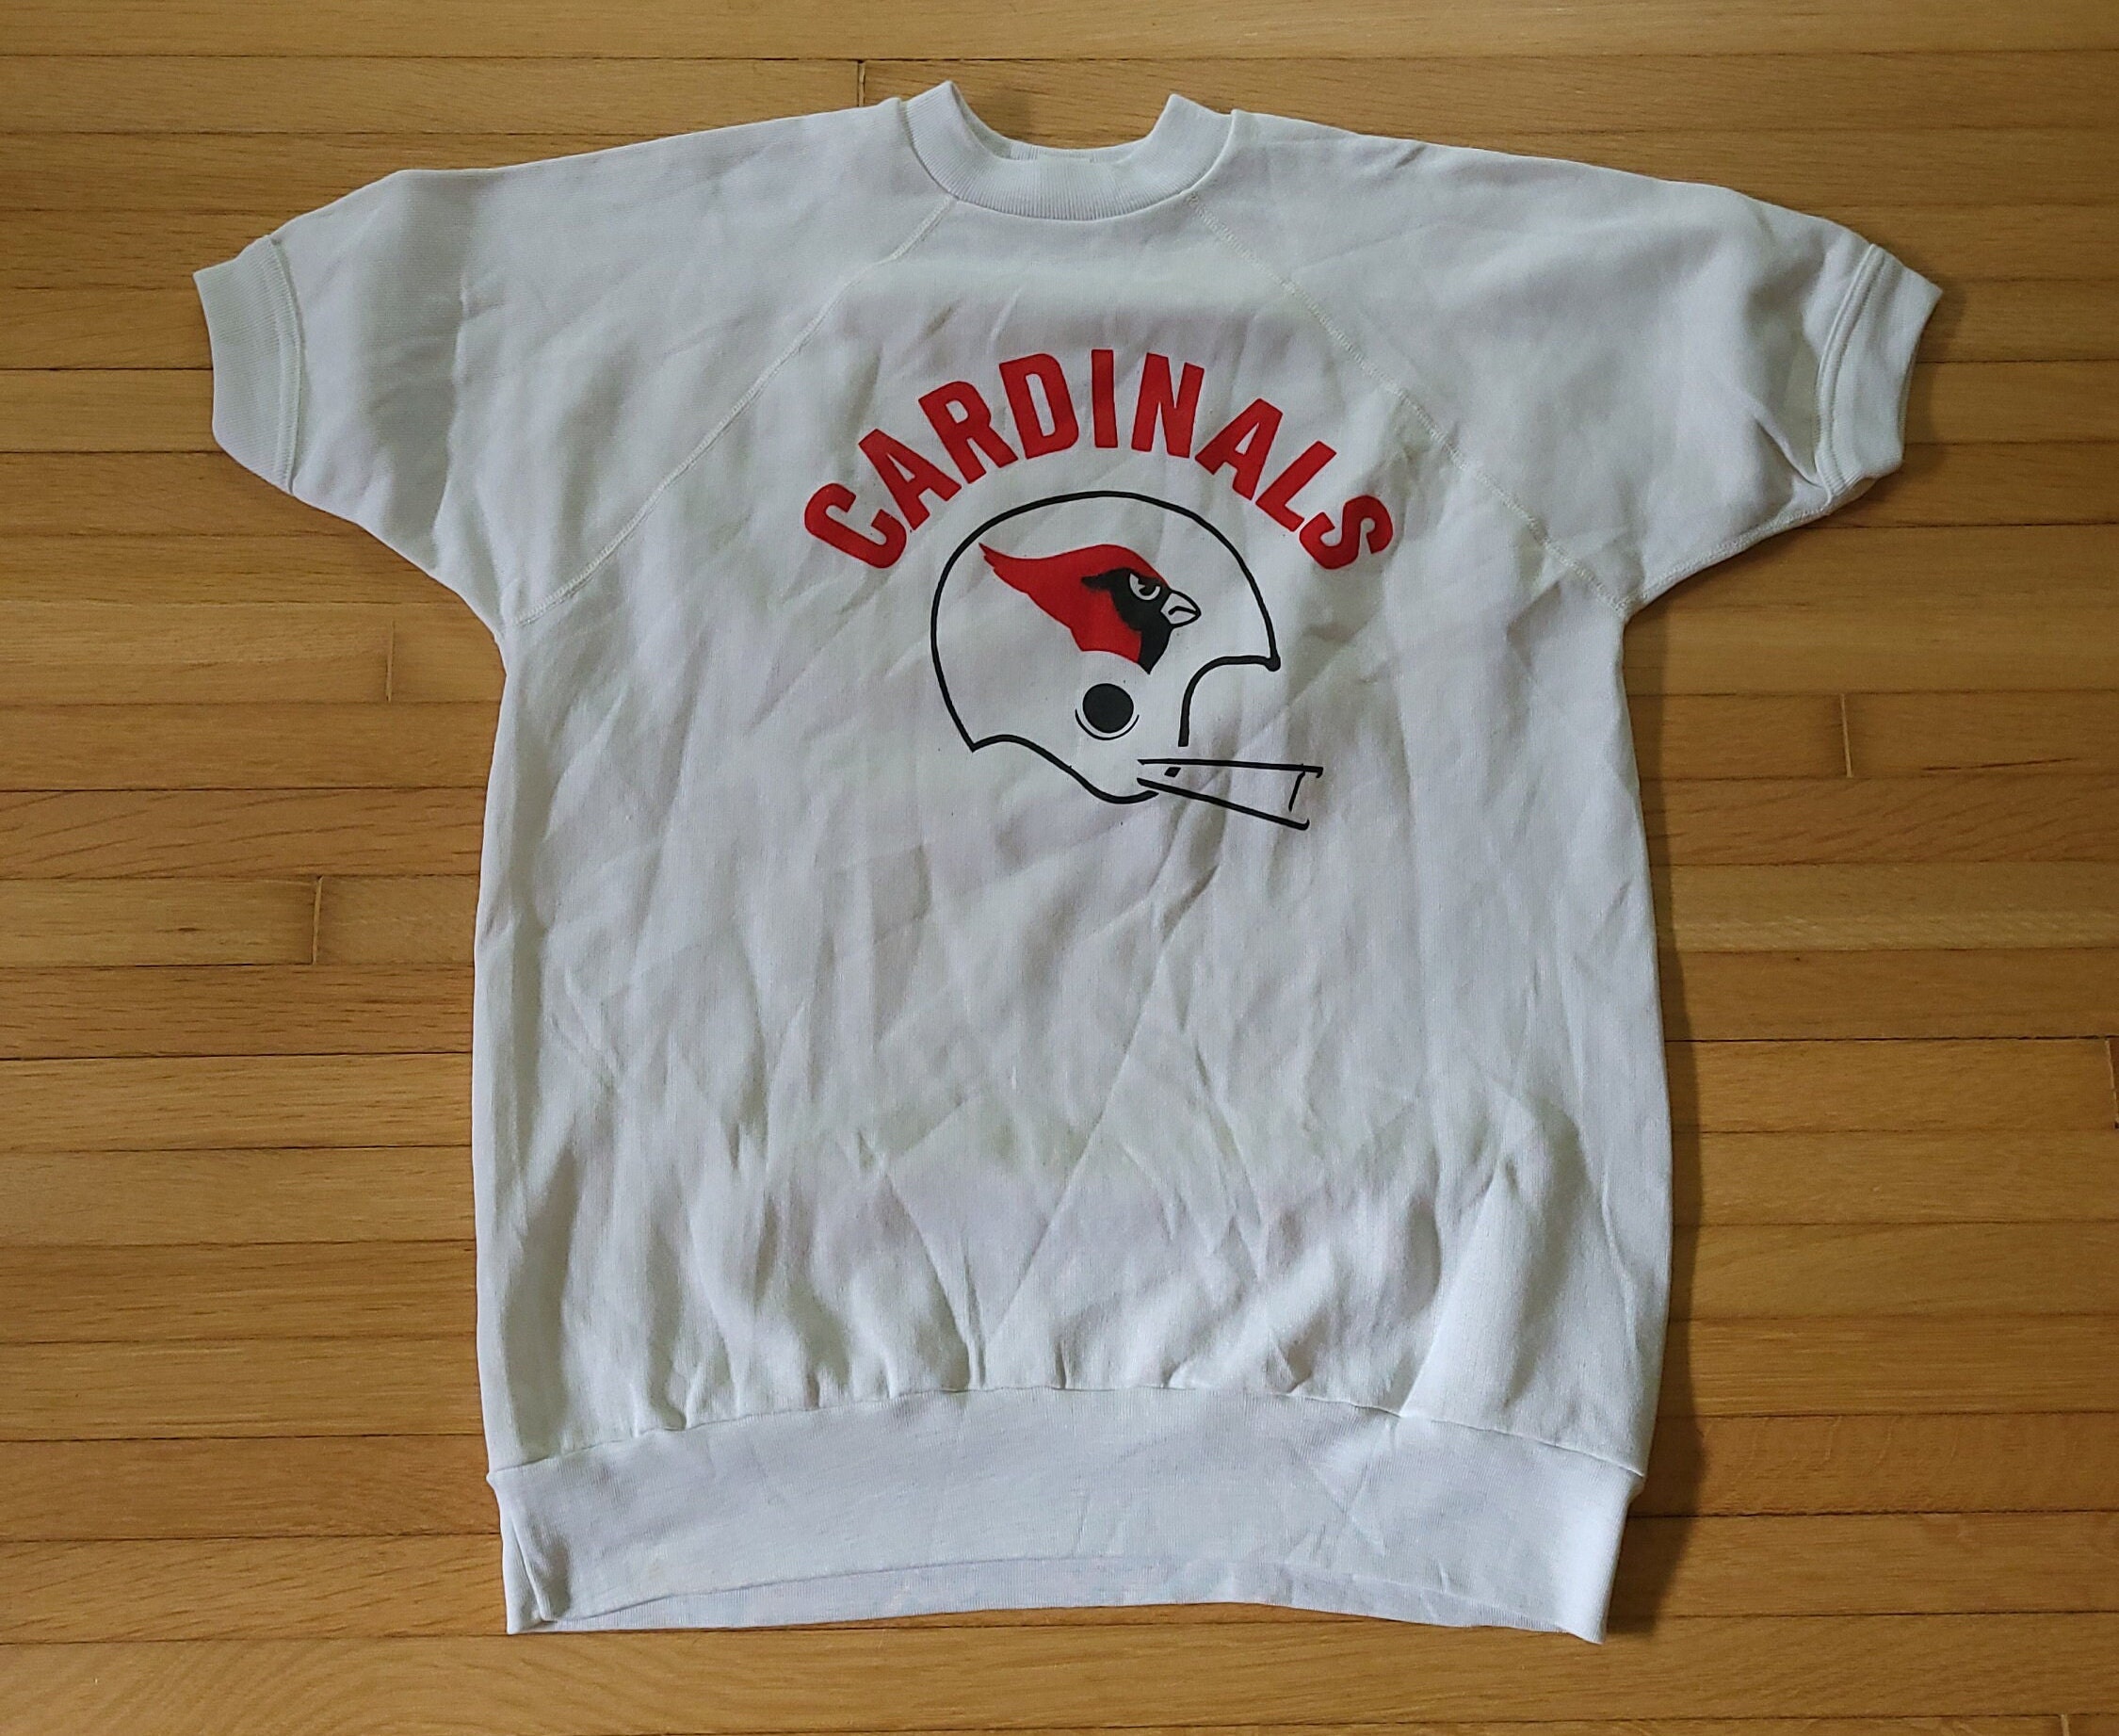 Men's White/Red St. Louis Cardinals Show The Leather Raglan V-Neck T-Shirt